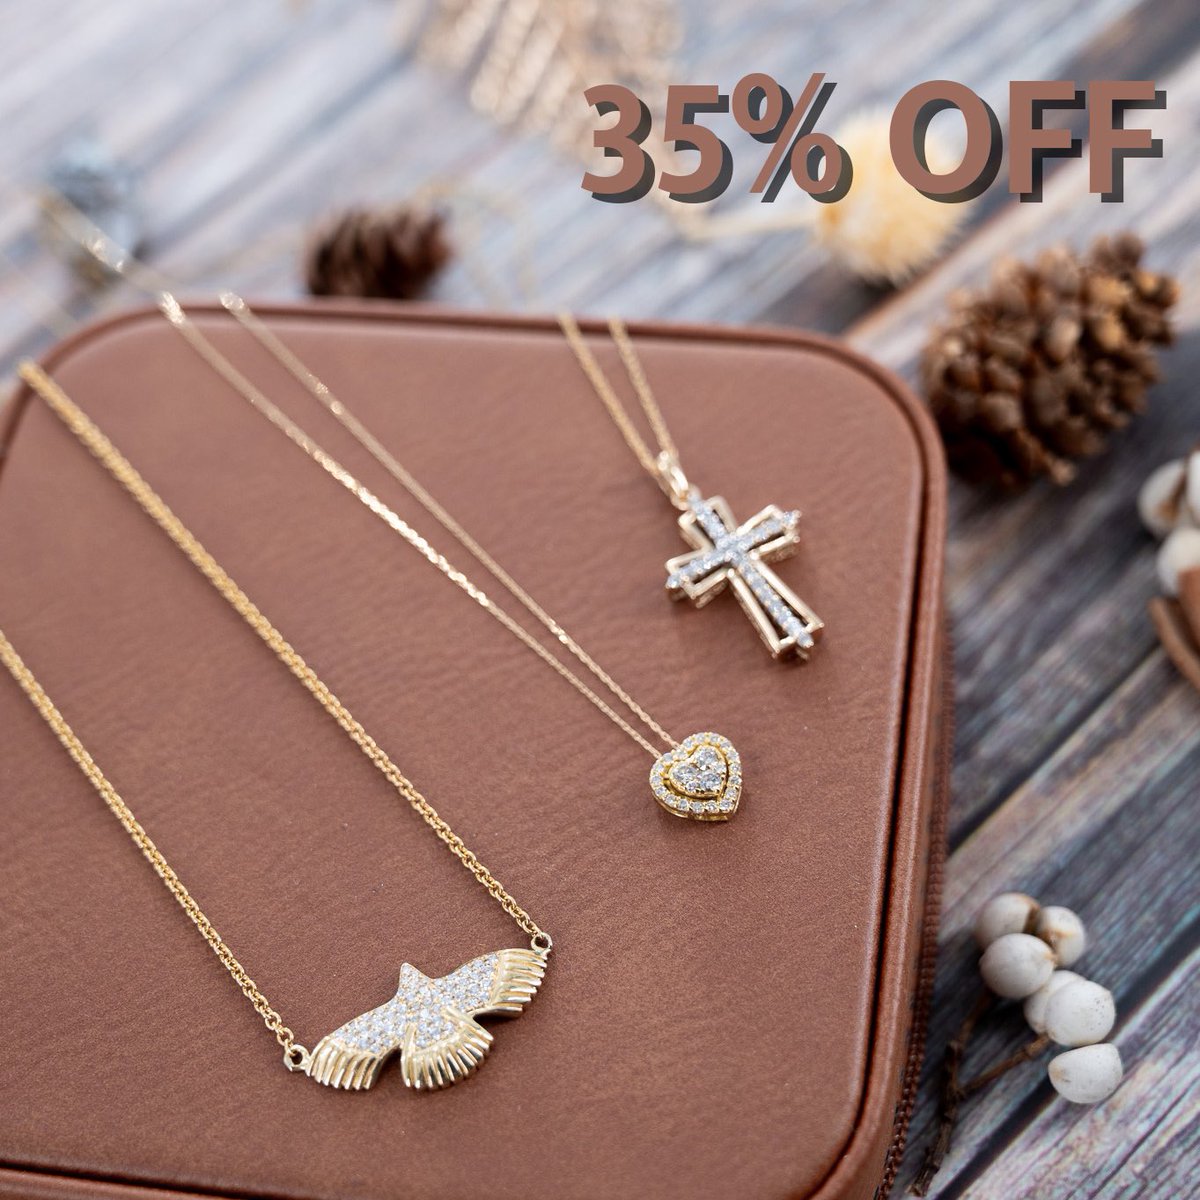 🍂 Fall for Style! 🍁 Enjoy 35% Off on our stunning Autumn Collection Jewelry. Explore the cozy elegance and charm now on Etsy! 🔗Link in Bio. #AutumnJewelry #FineJewelry #JewelrySale #777Jewelry #GoldJewelry